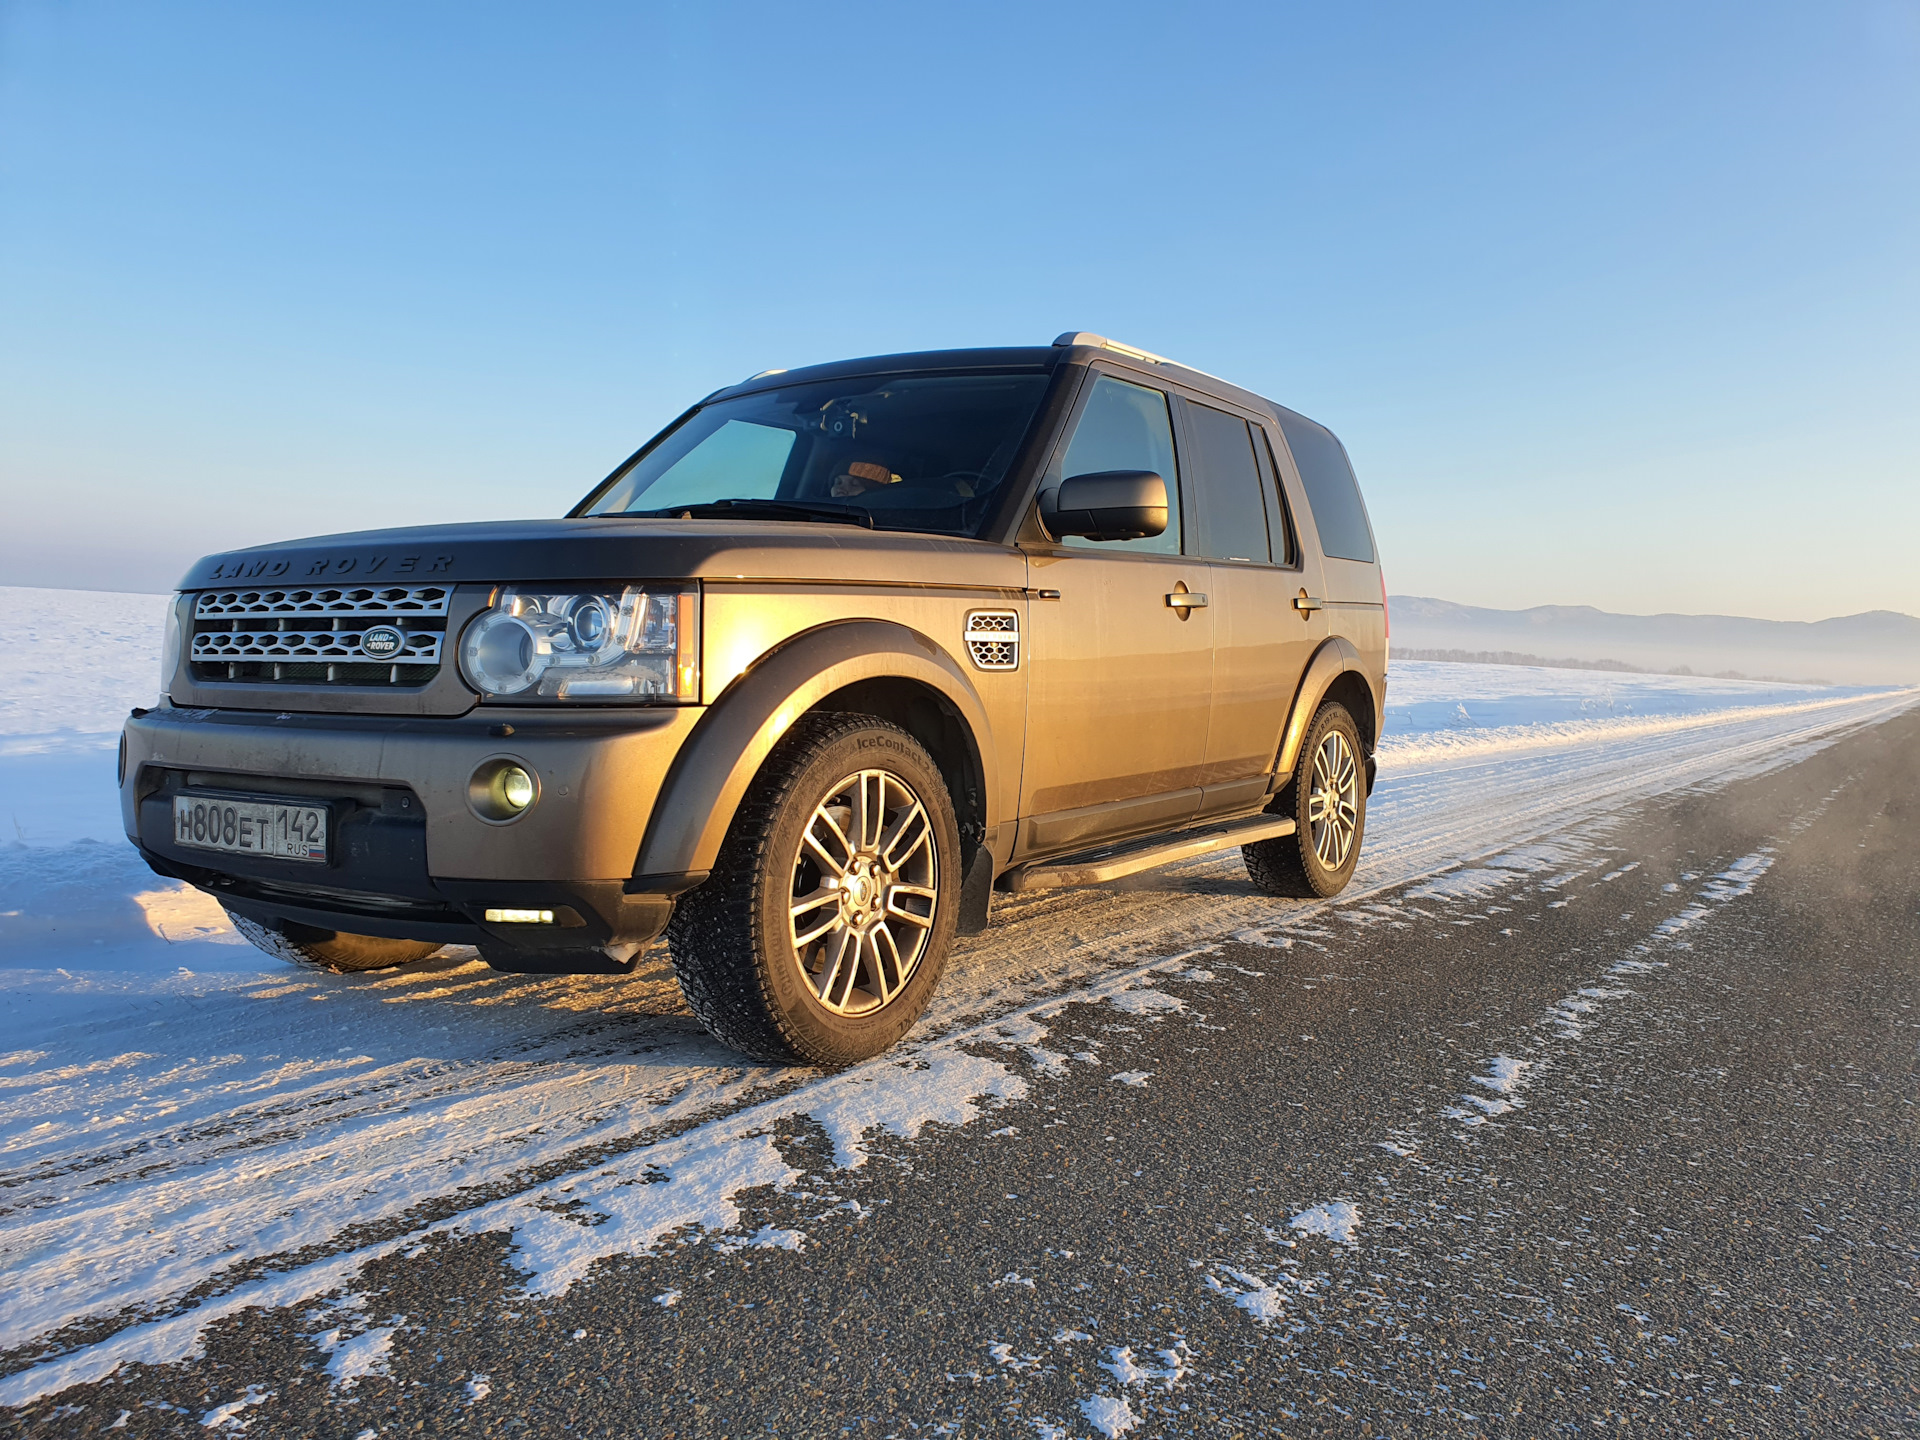 Дискавери 12. Land Rover Discovery 4. Land Rover Discovery 6. Land Rover Discovery 3. Дискавери 2.